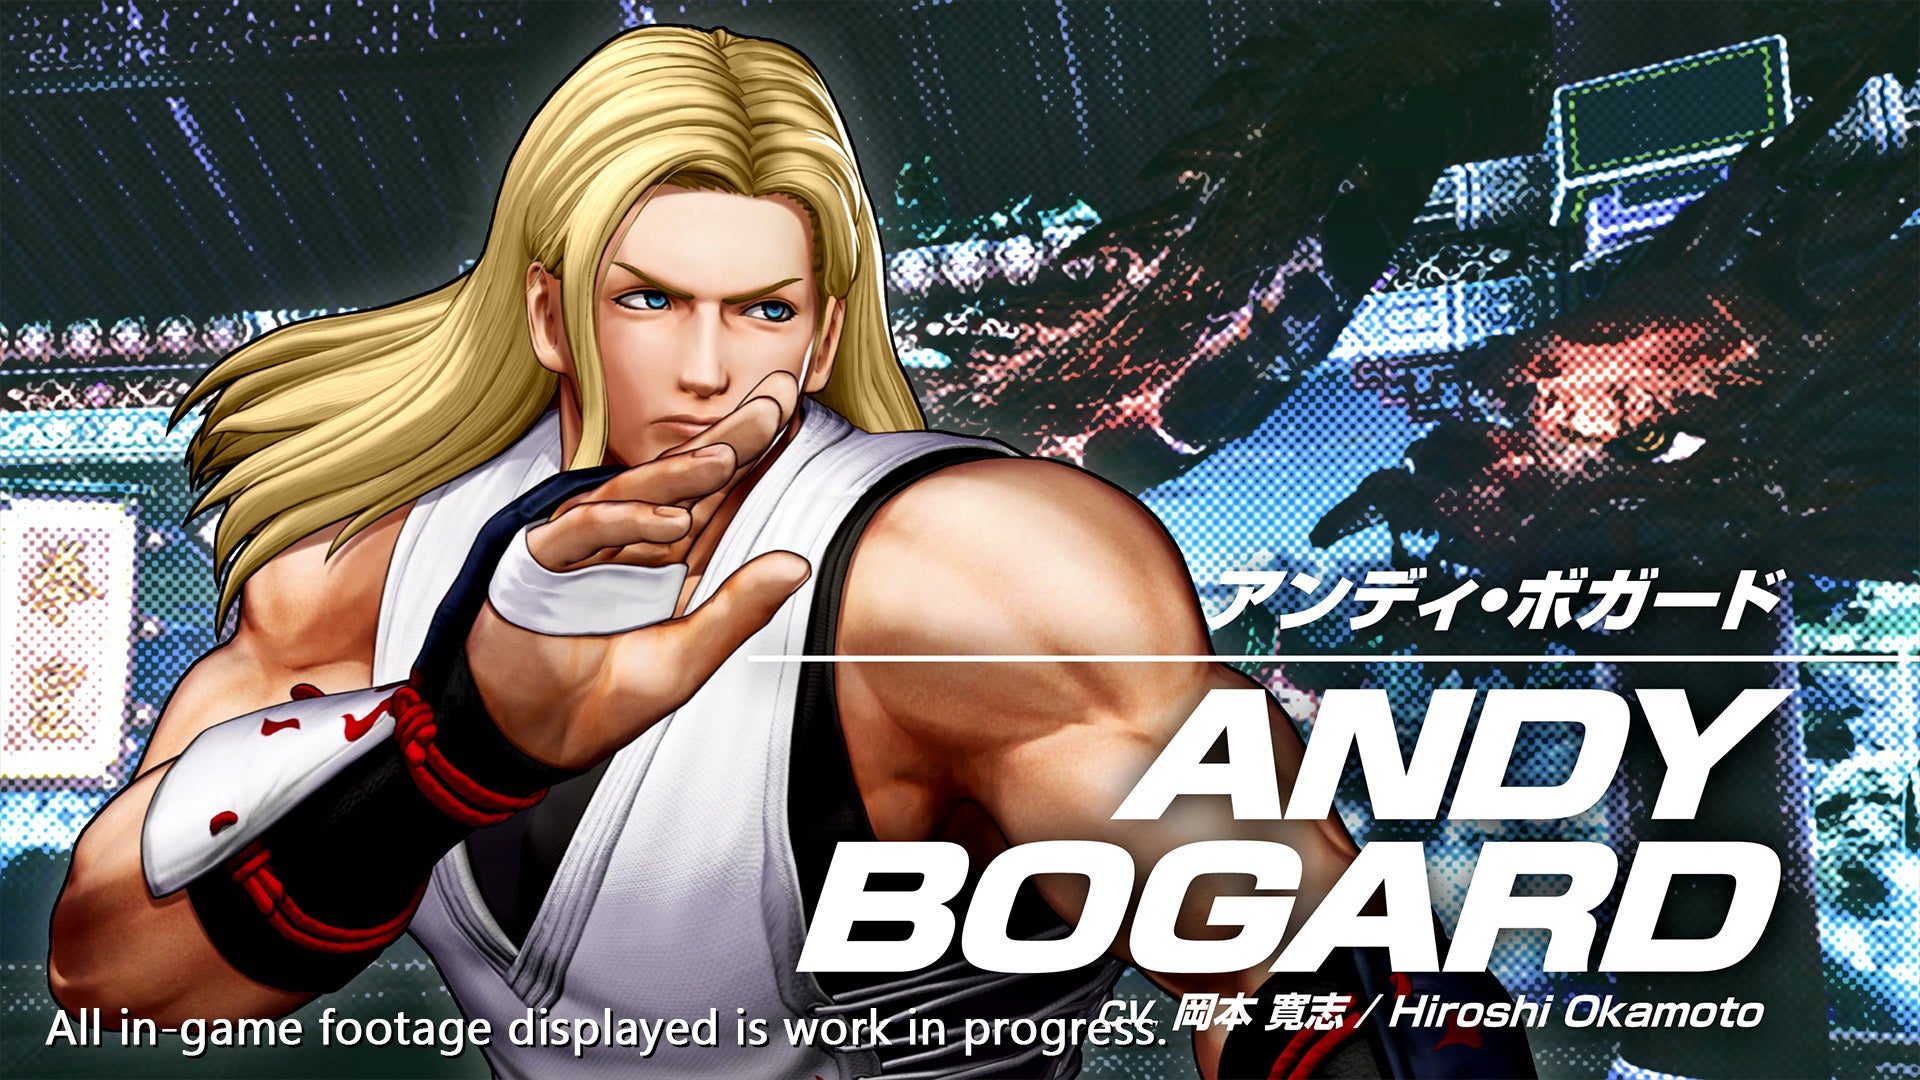 Image for Andy Bogard latest character to join King of Fighters 15 roster